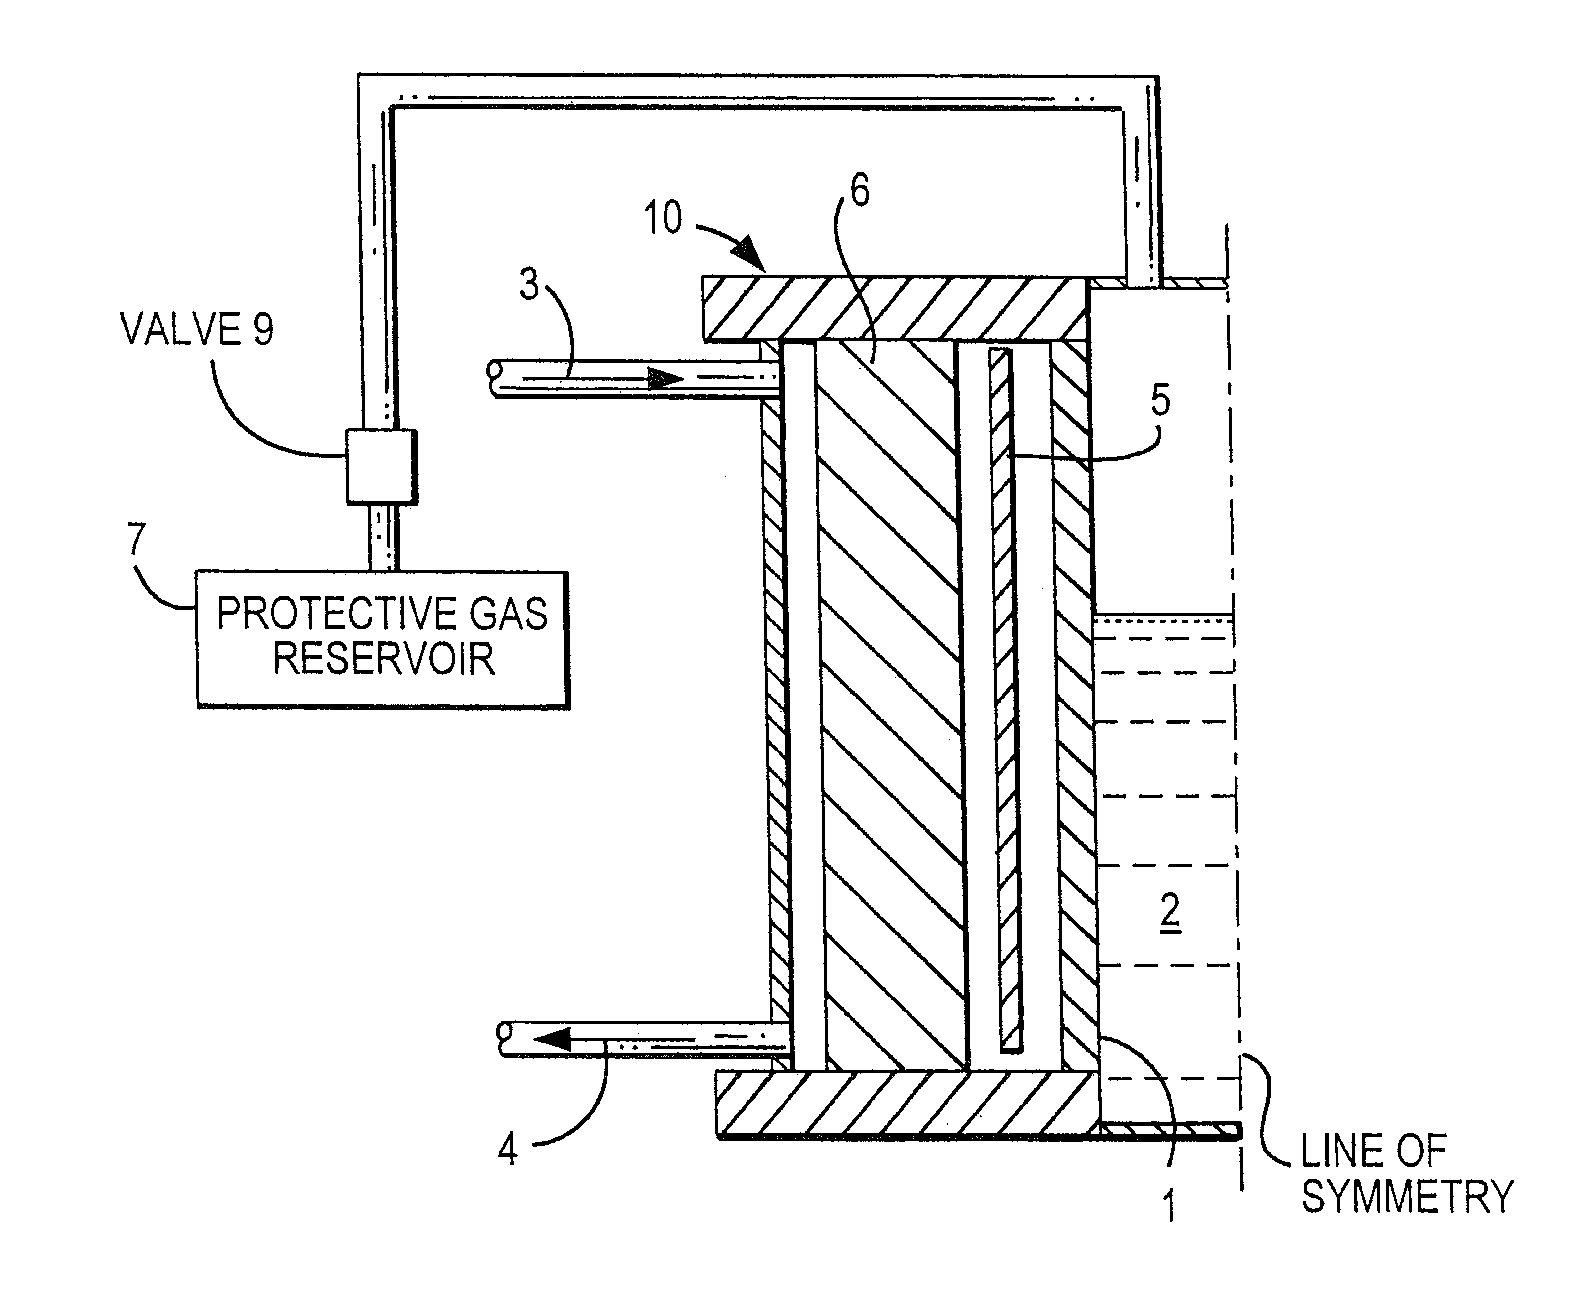 Method and device for refining a glass melt using negative pressure